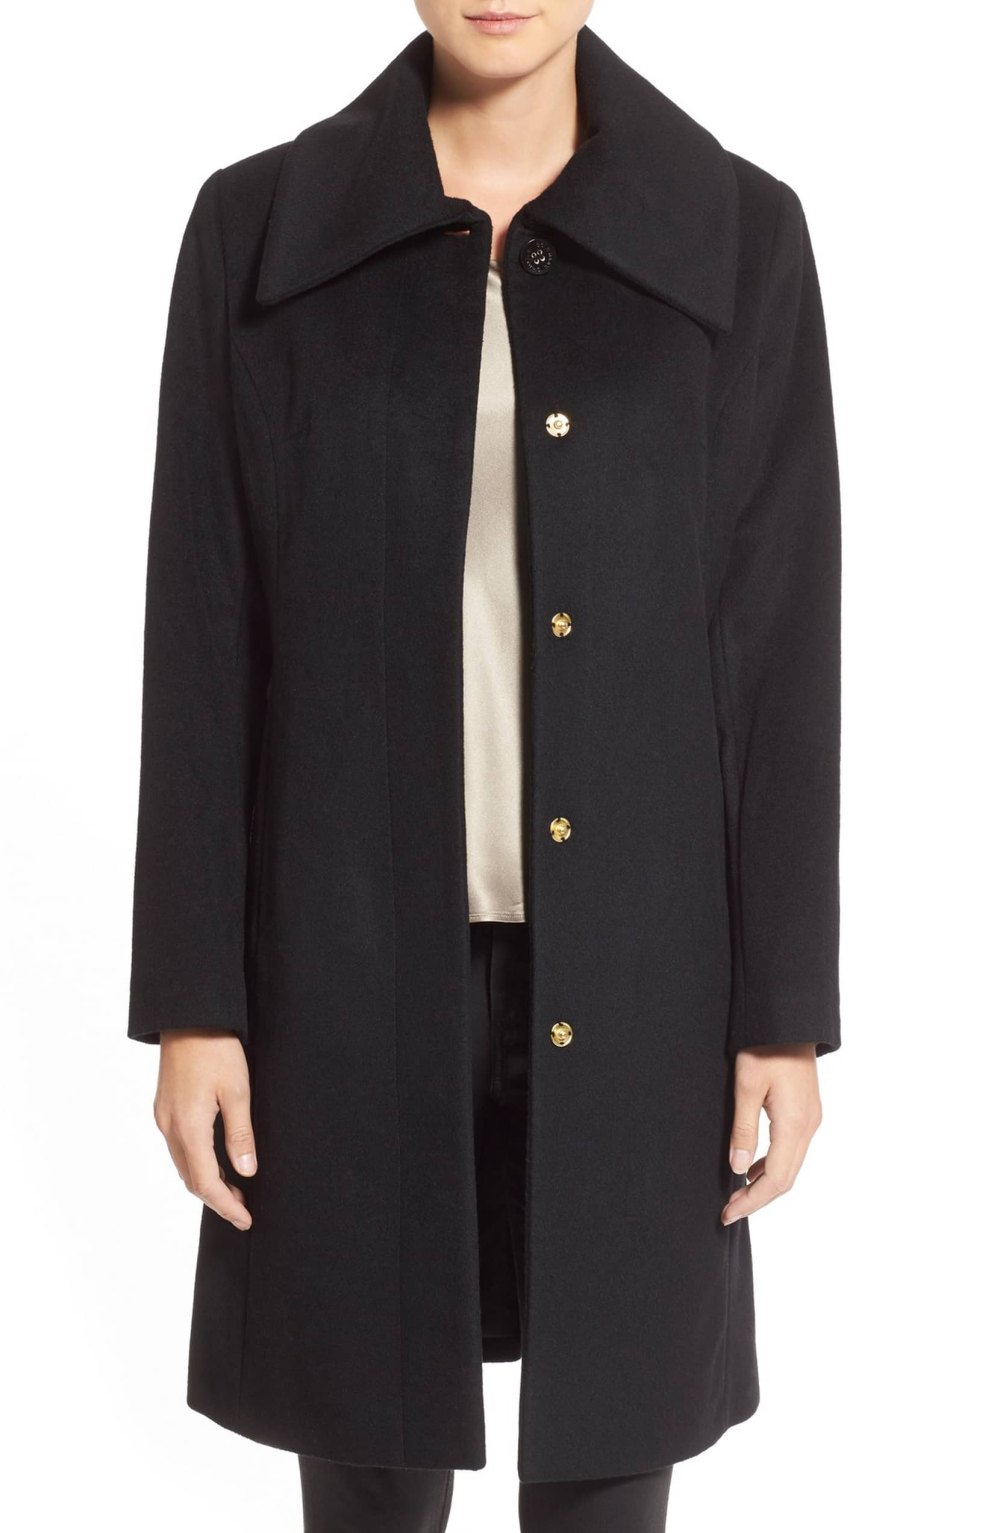 Shop This Cole Haan Wool Blend Coat on Sale at Nordstrom